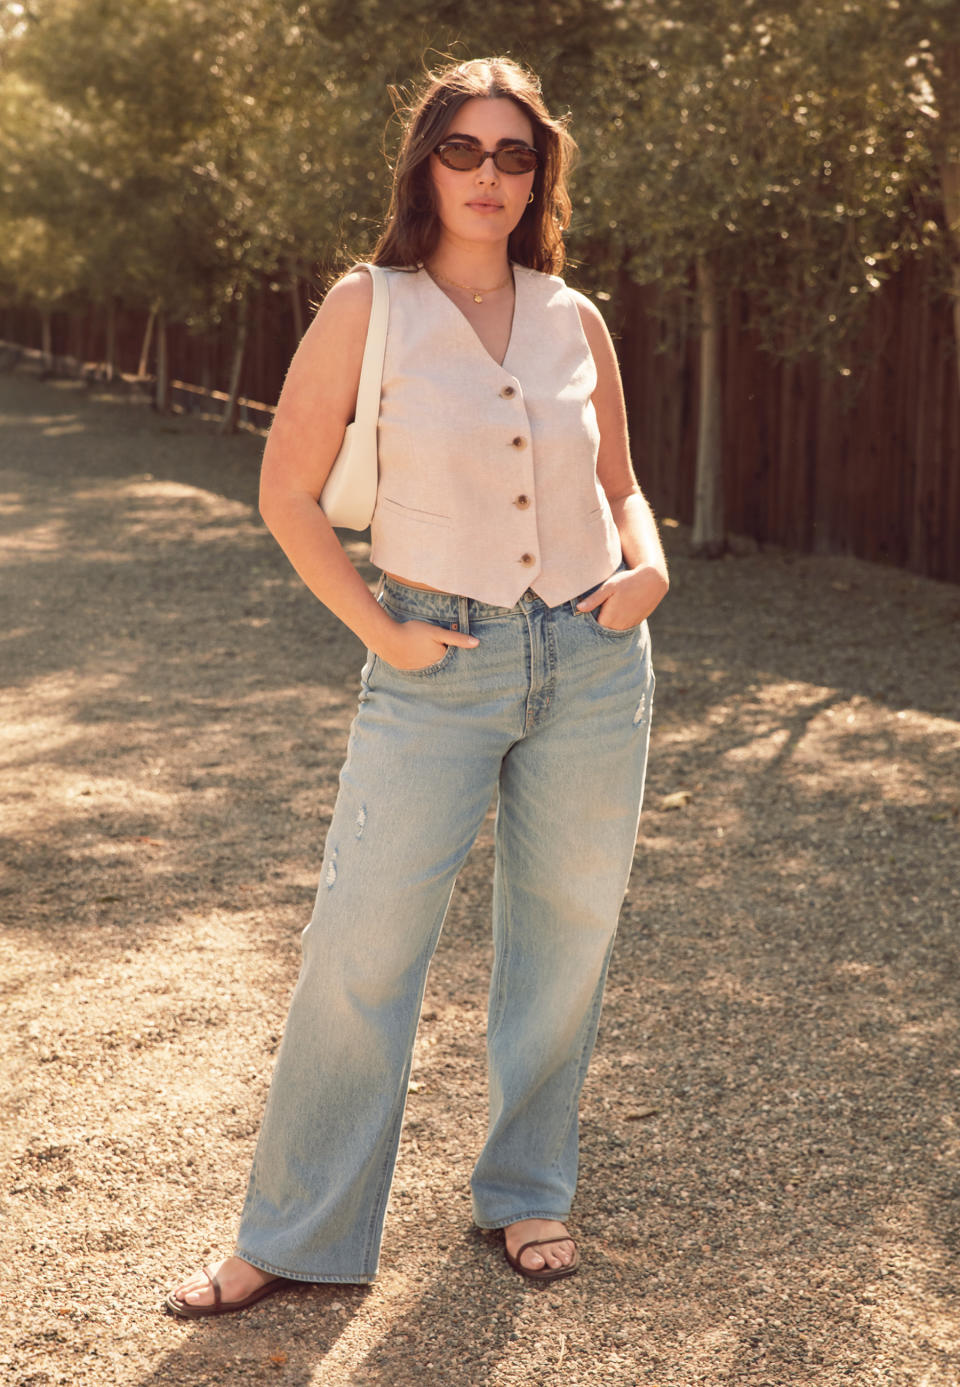 Old Navy's wide-leg denim jeans are best-sellers this season.